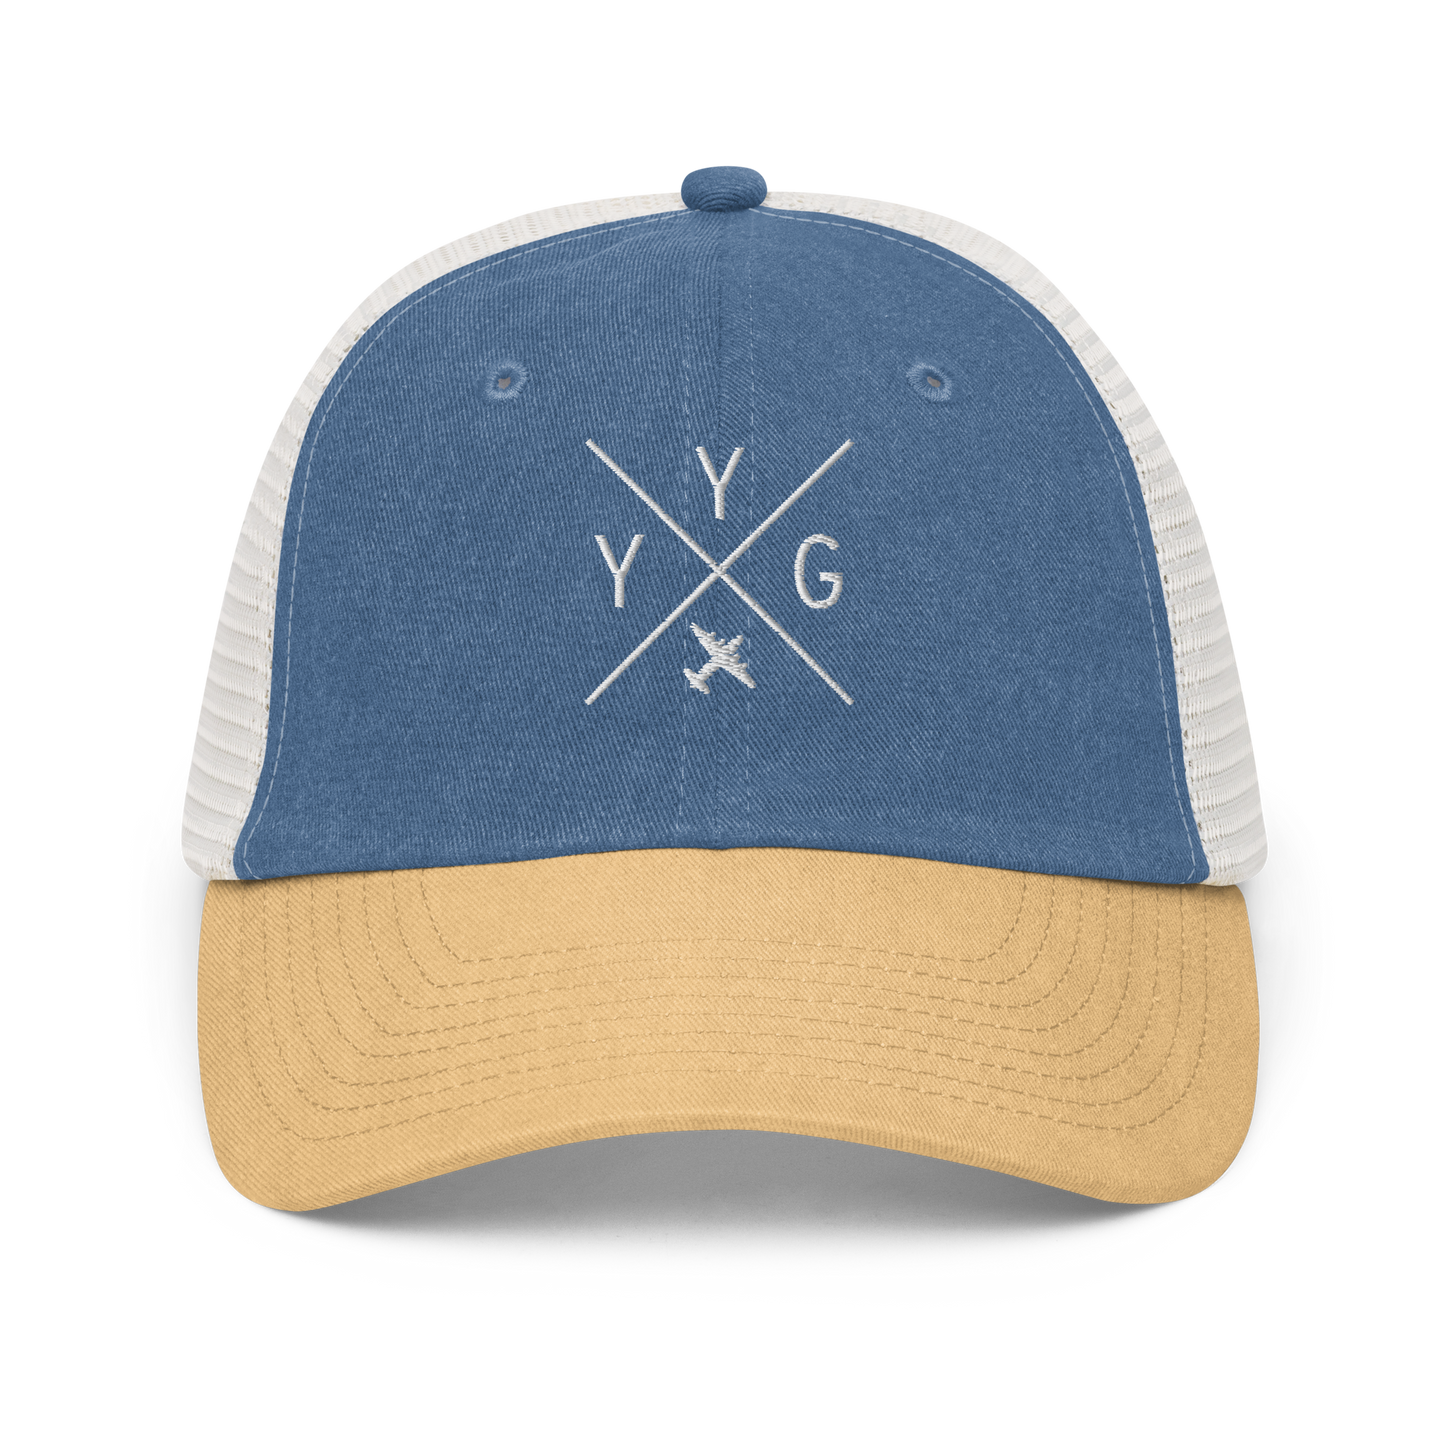 YHM Designs - YYG Charlottetown Pigment-Dyed Trucker Cap - Crossed-X Design with Airport Code and Vintage Propliner - White Embroidery - Image 01